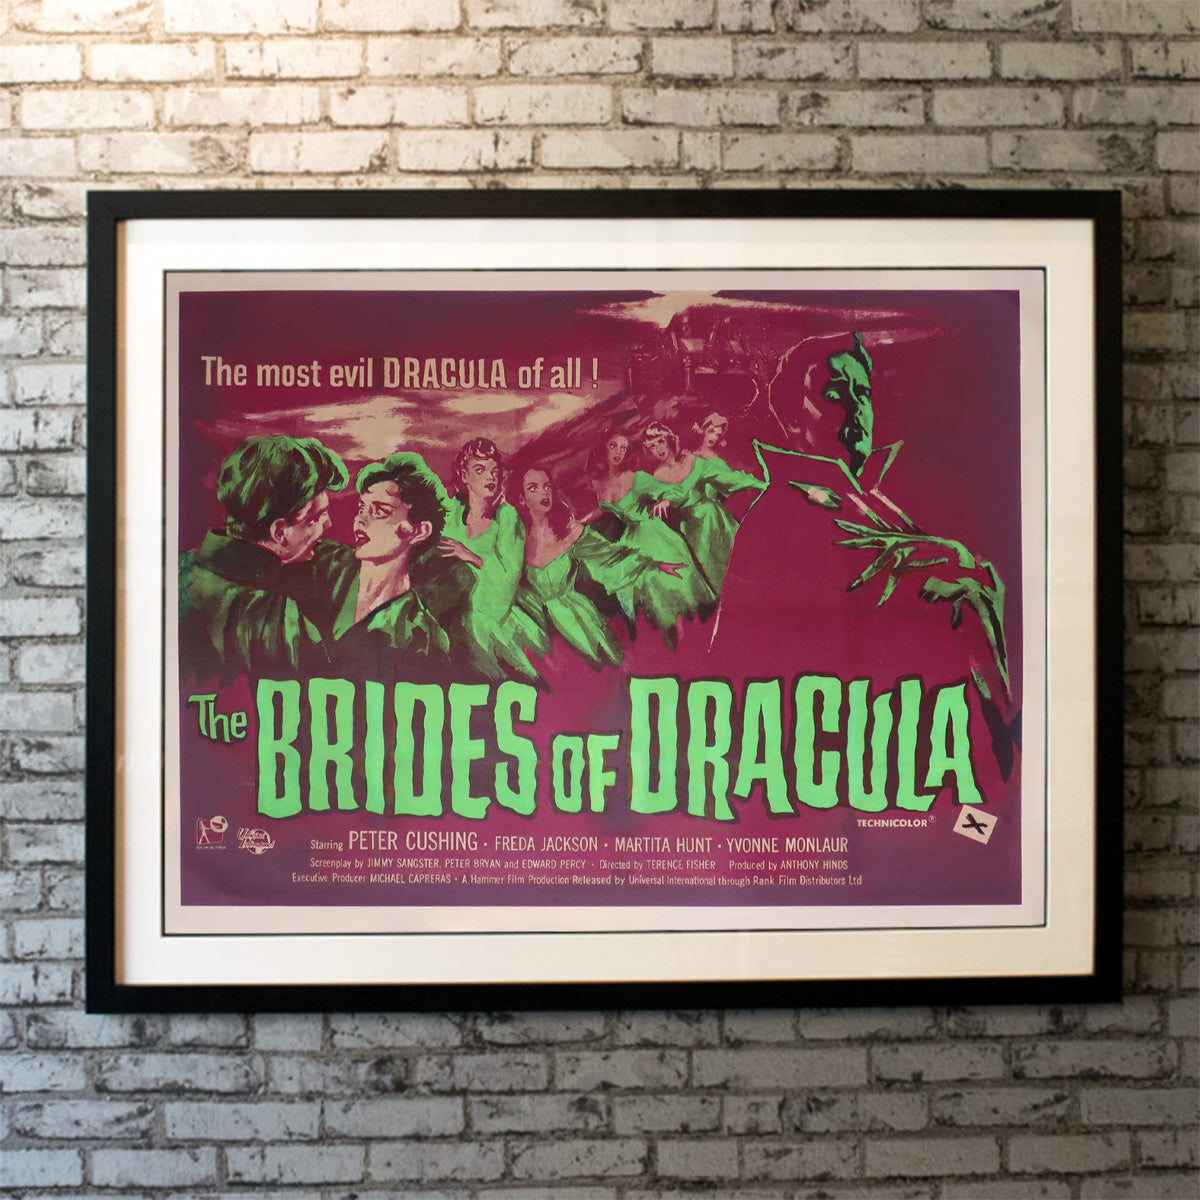 Brides of Dracula, The (1960s R)